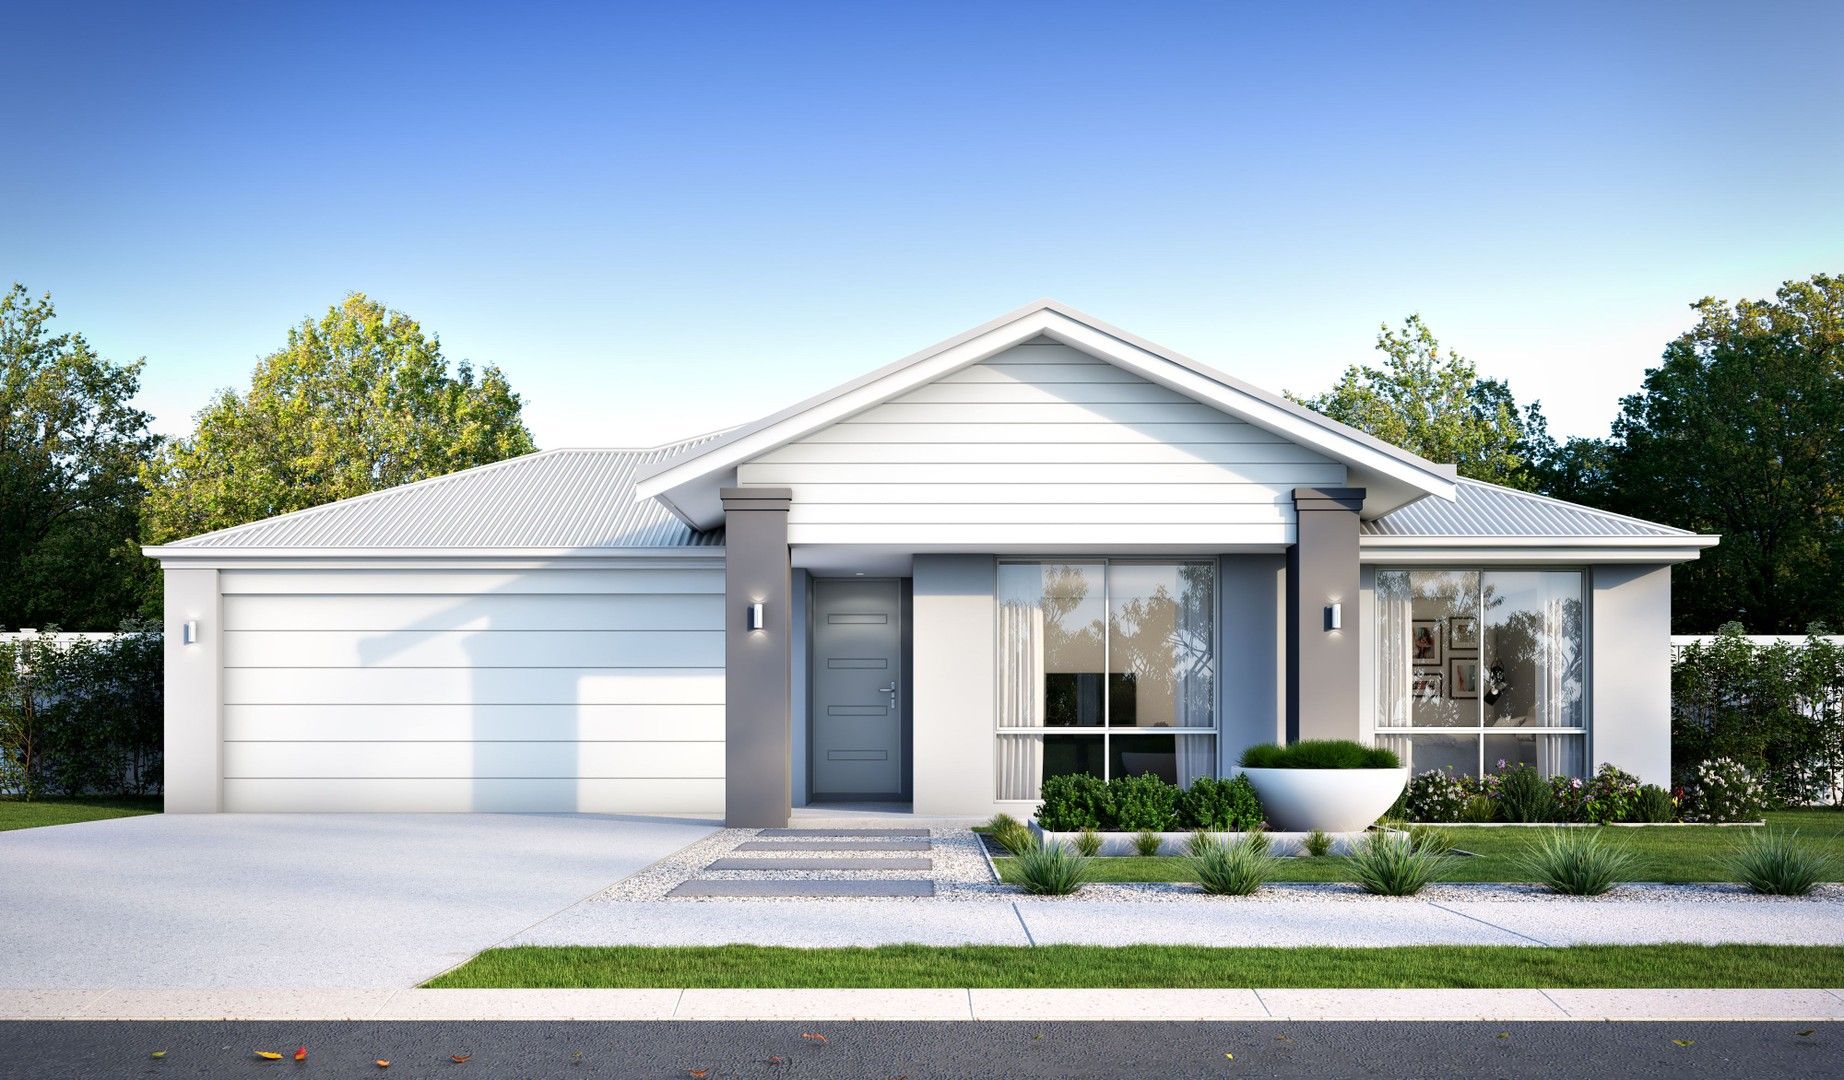 4 bedrooms New House & Land in 141 Eminence Street SINAGRA WA, 6065